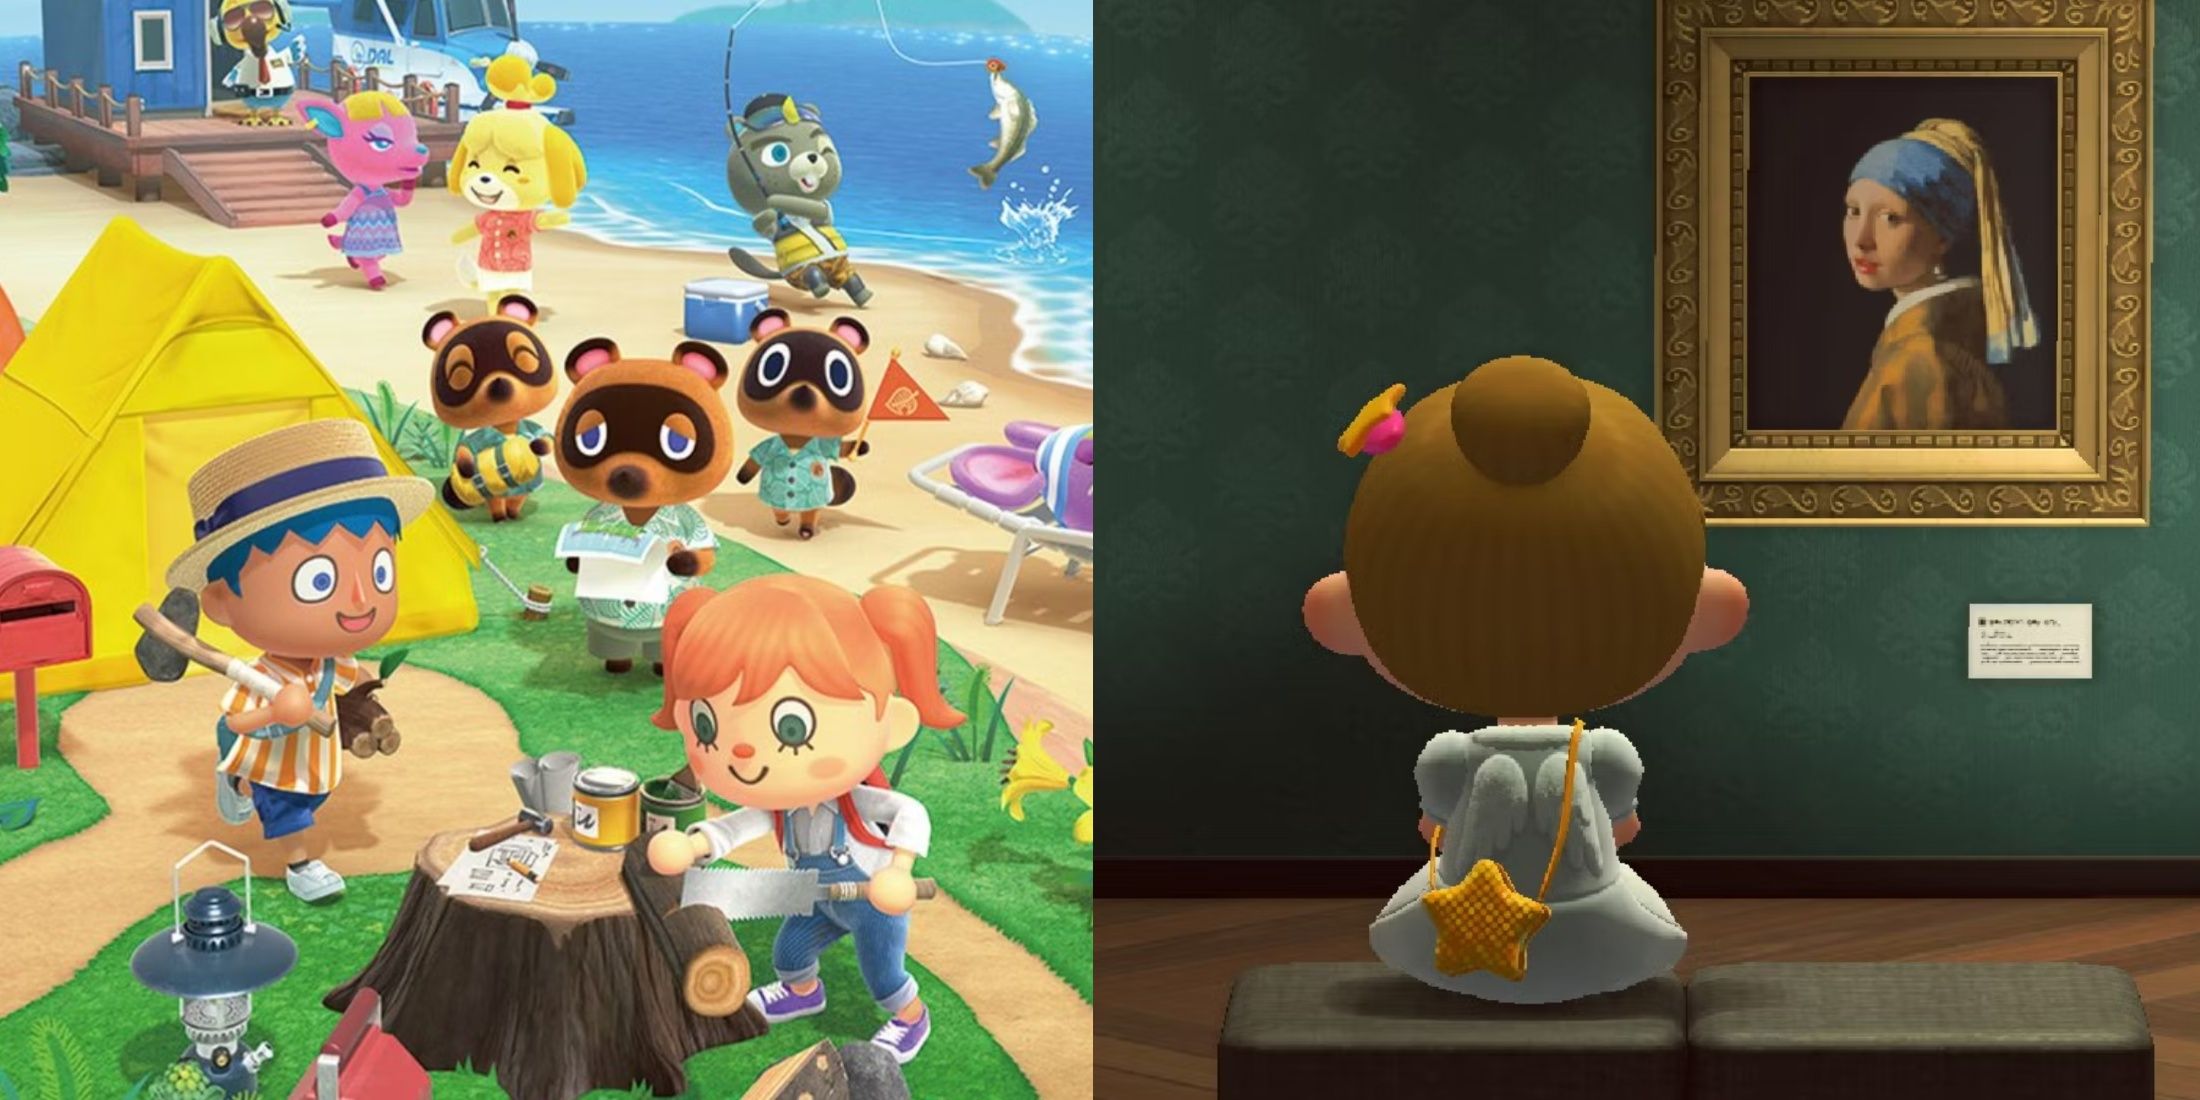 Key promo art for Animal Crossing next to a villager looking at a painting.